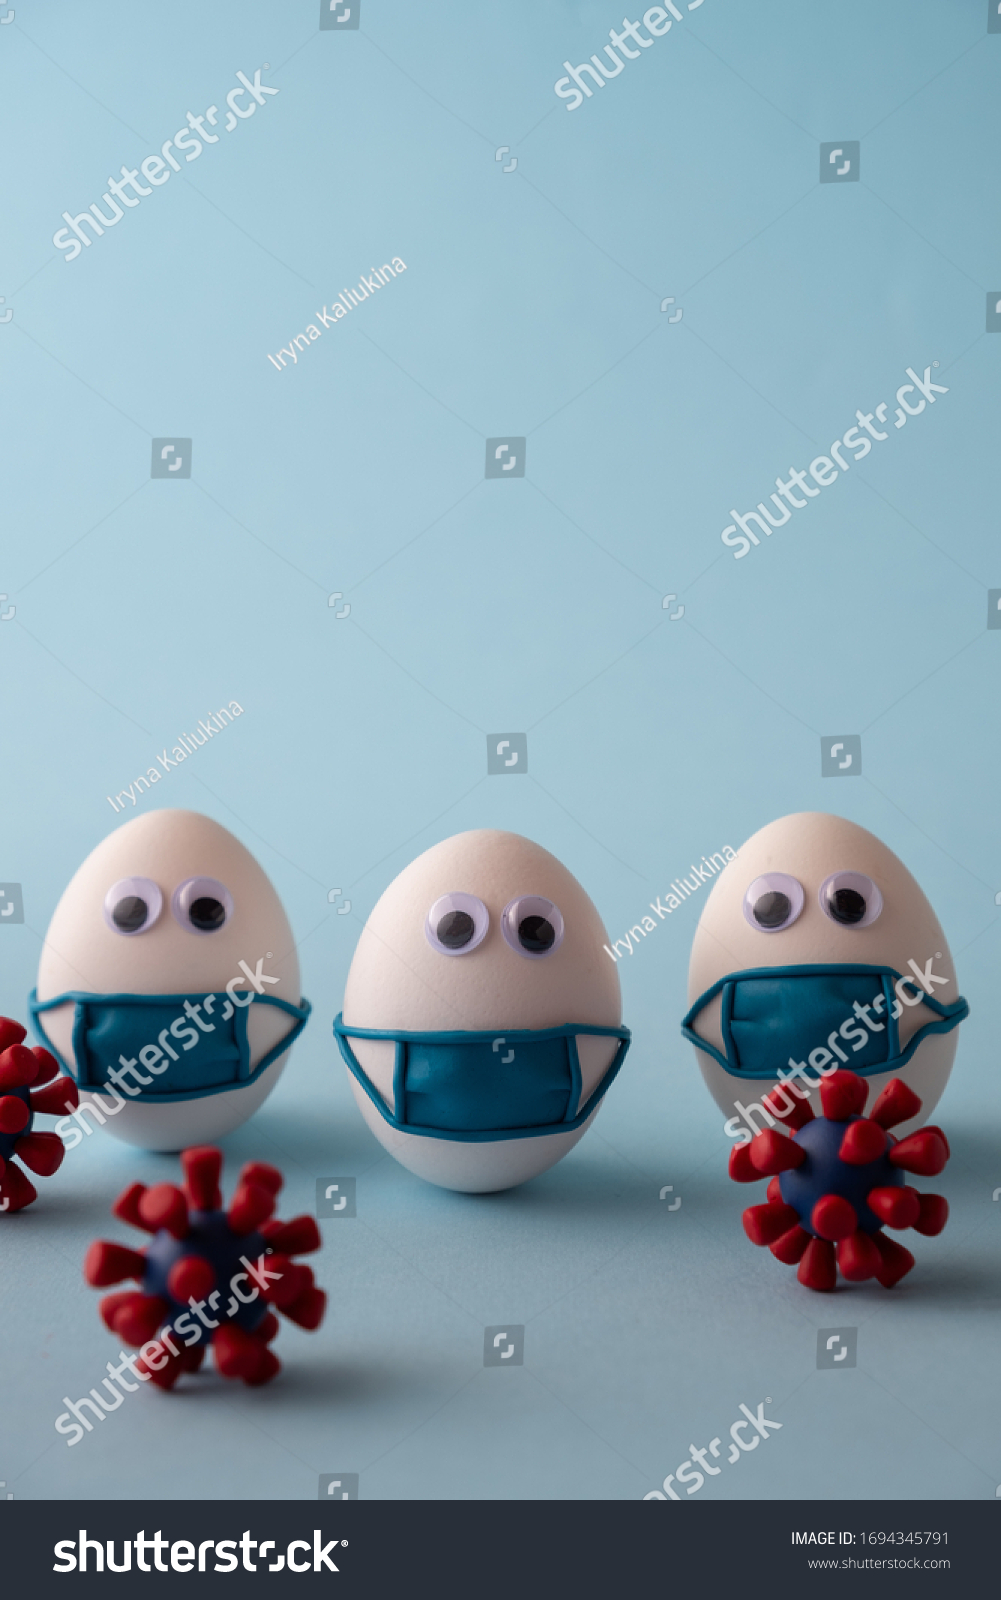 Eggs wearing medical mask for stop coronavirus and models of covid-19 virus on blue background. Epidemic coronavirus COVID-19 concept. Place fo text #1694345791